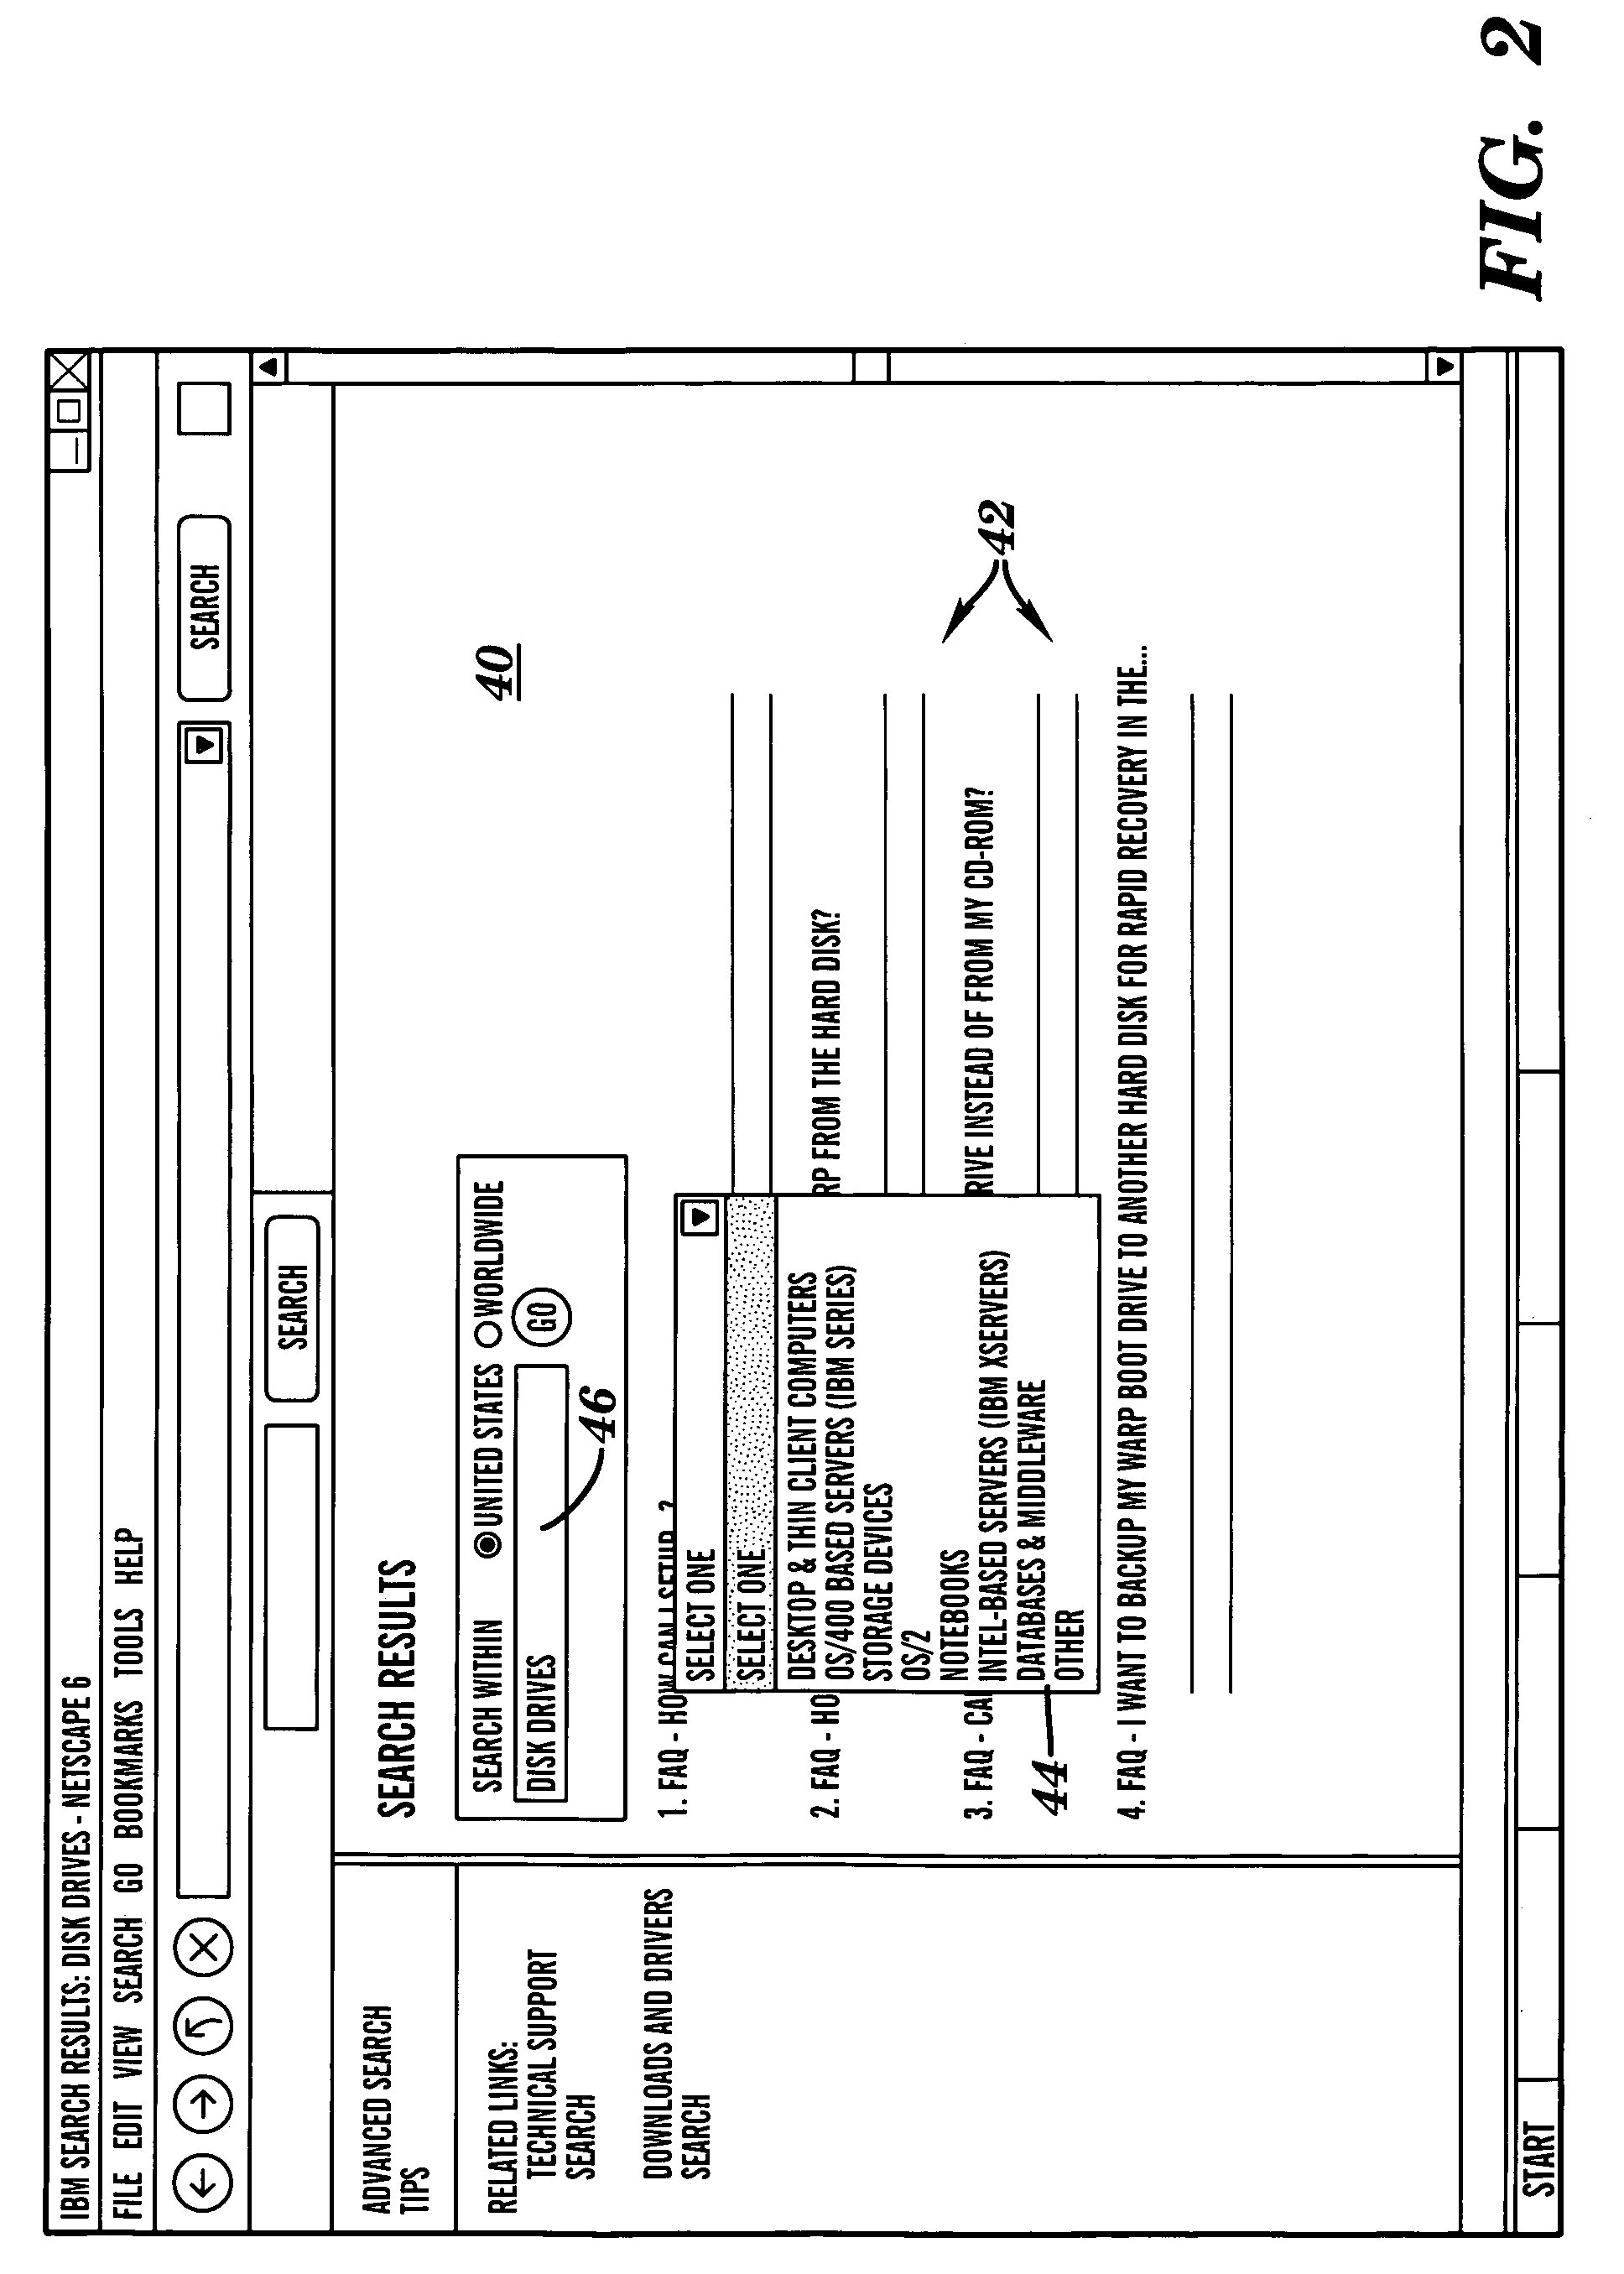 System and method for generating refinement categories for a set of search results